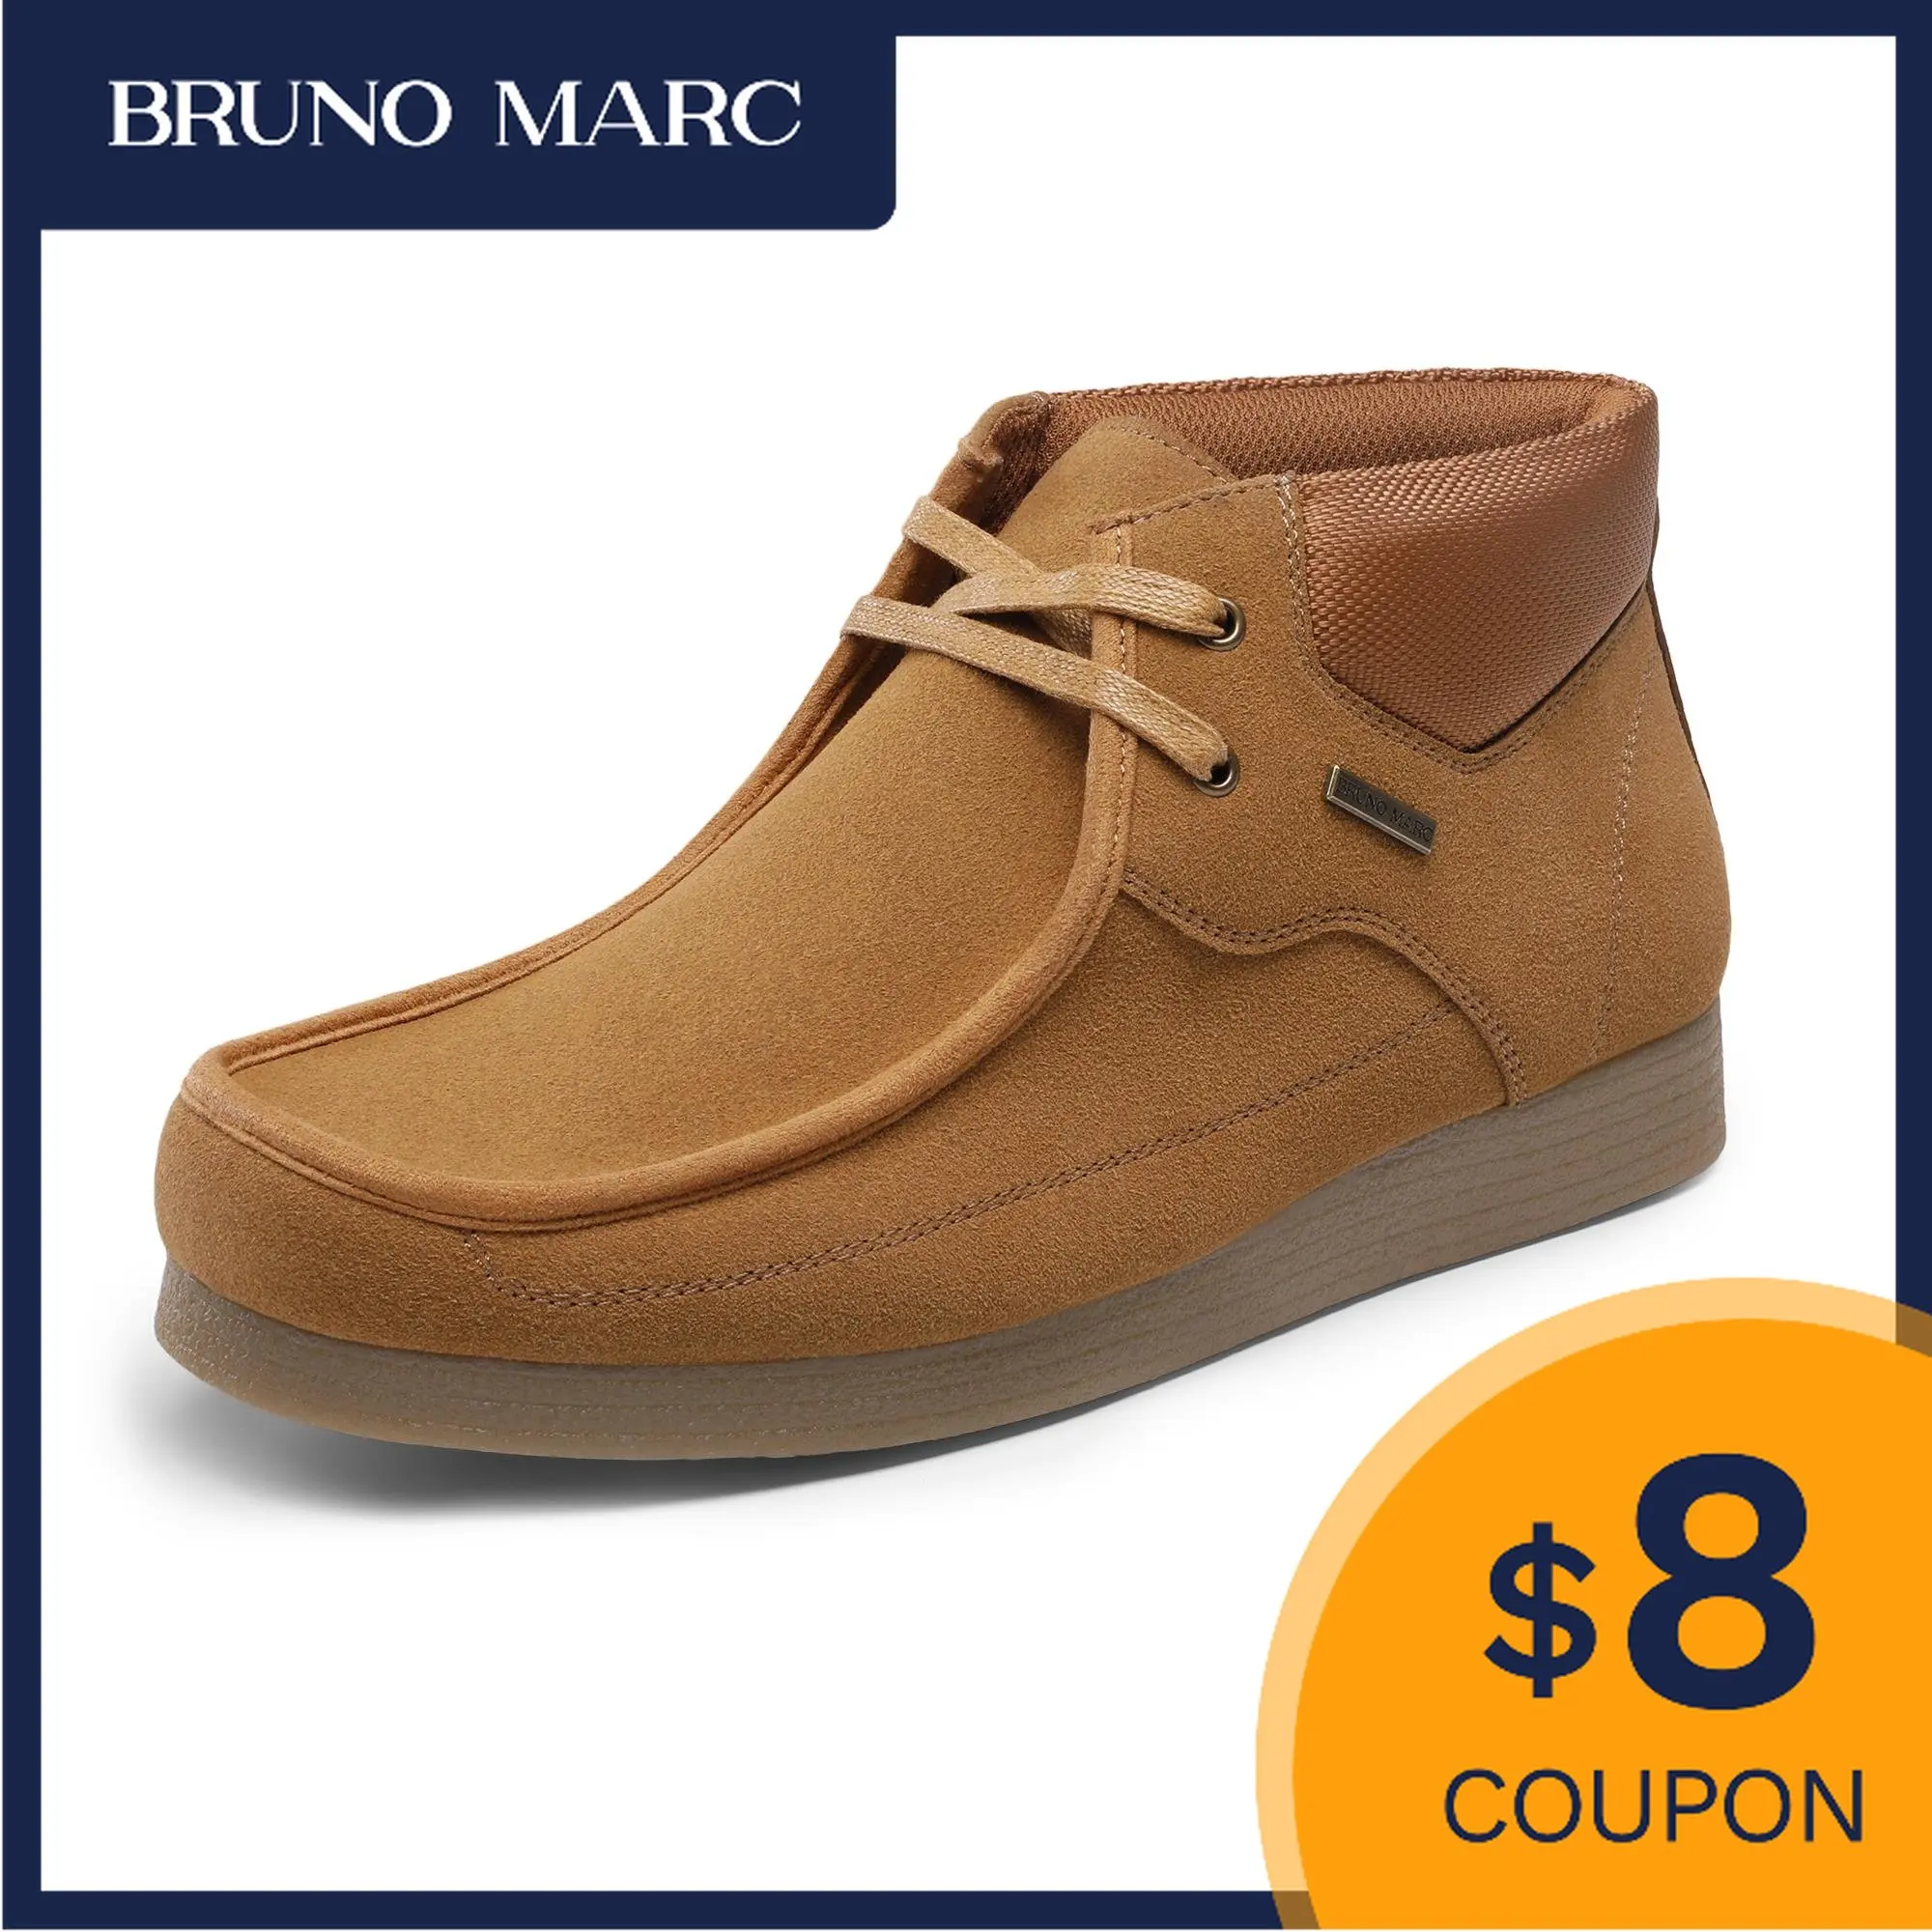 

Bruno Marc Men's Classic Snow Dress Boots Water Repellent Plain-toe Suede Leather Boot Featuring Suede Lace-up Front Closure